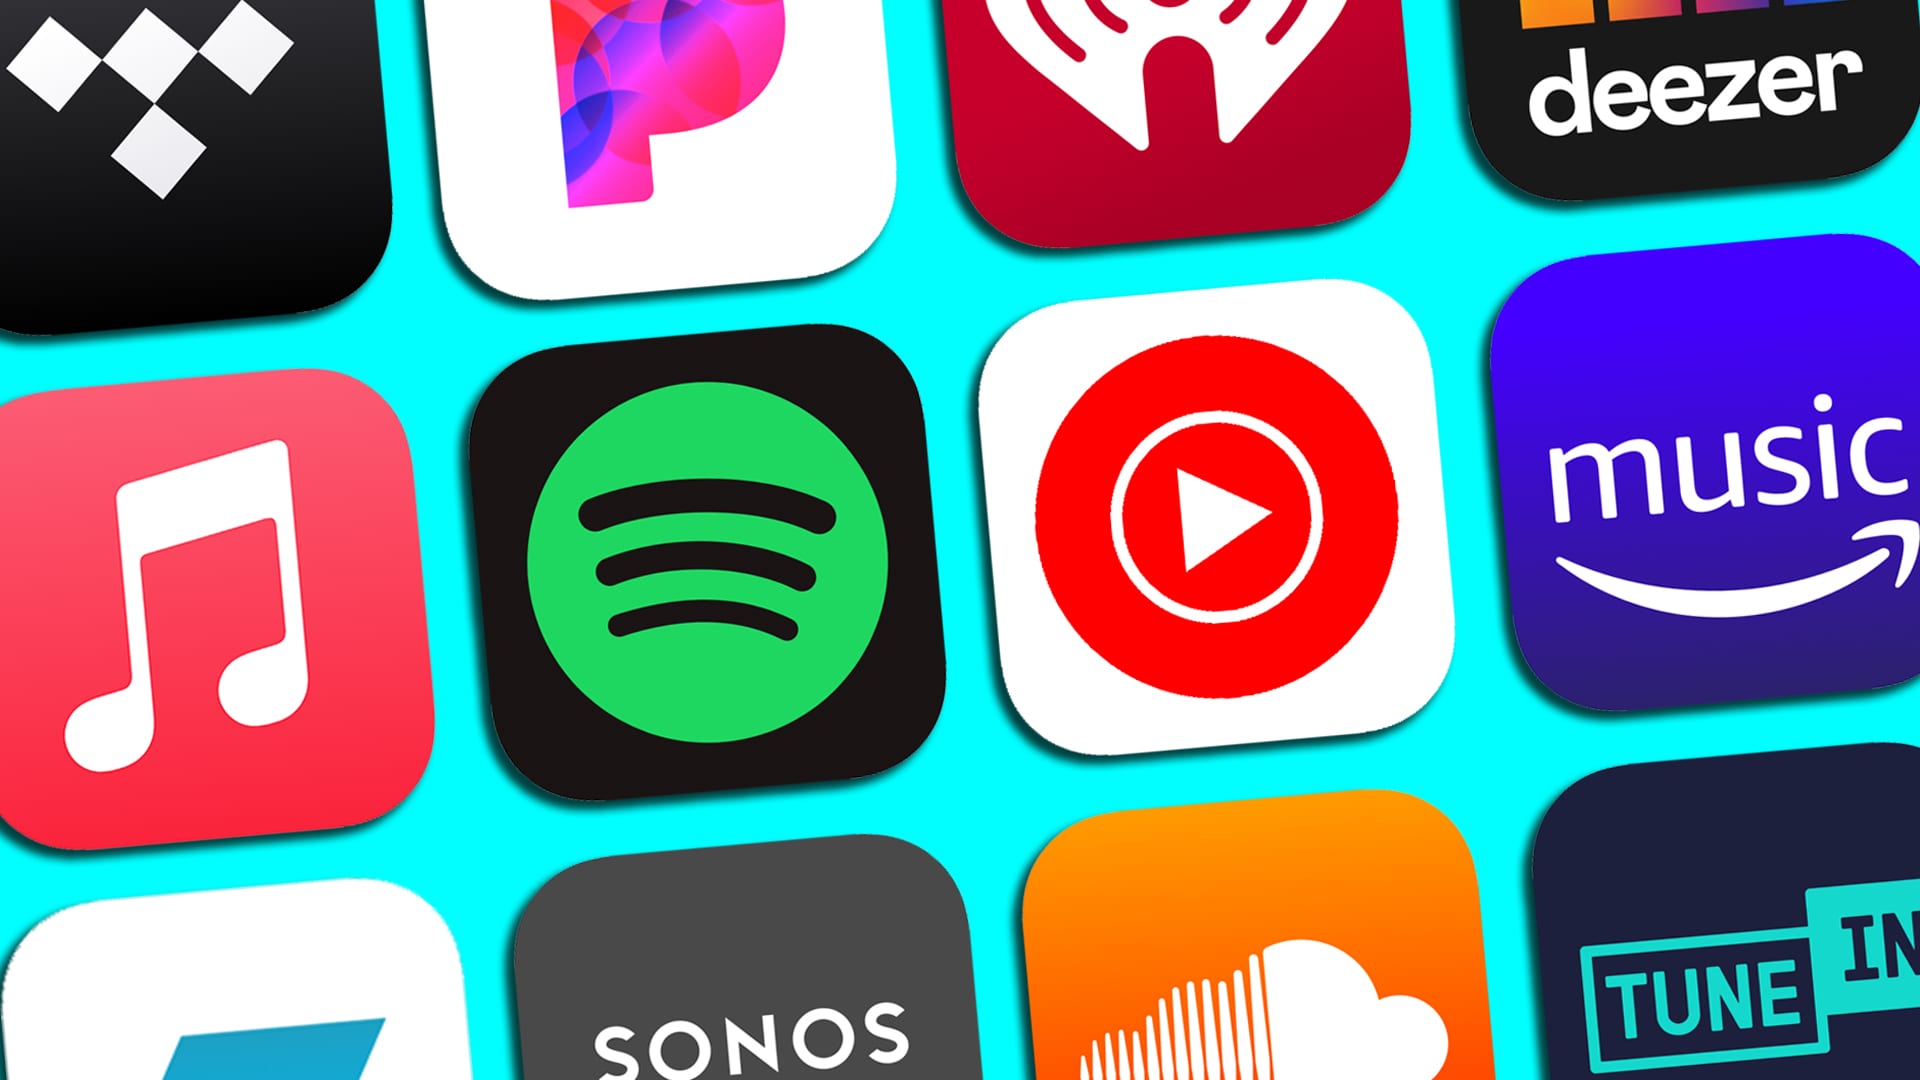 The EU argues that music streaming platforms must pay artists more.